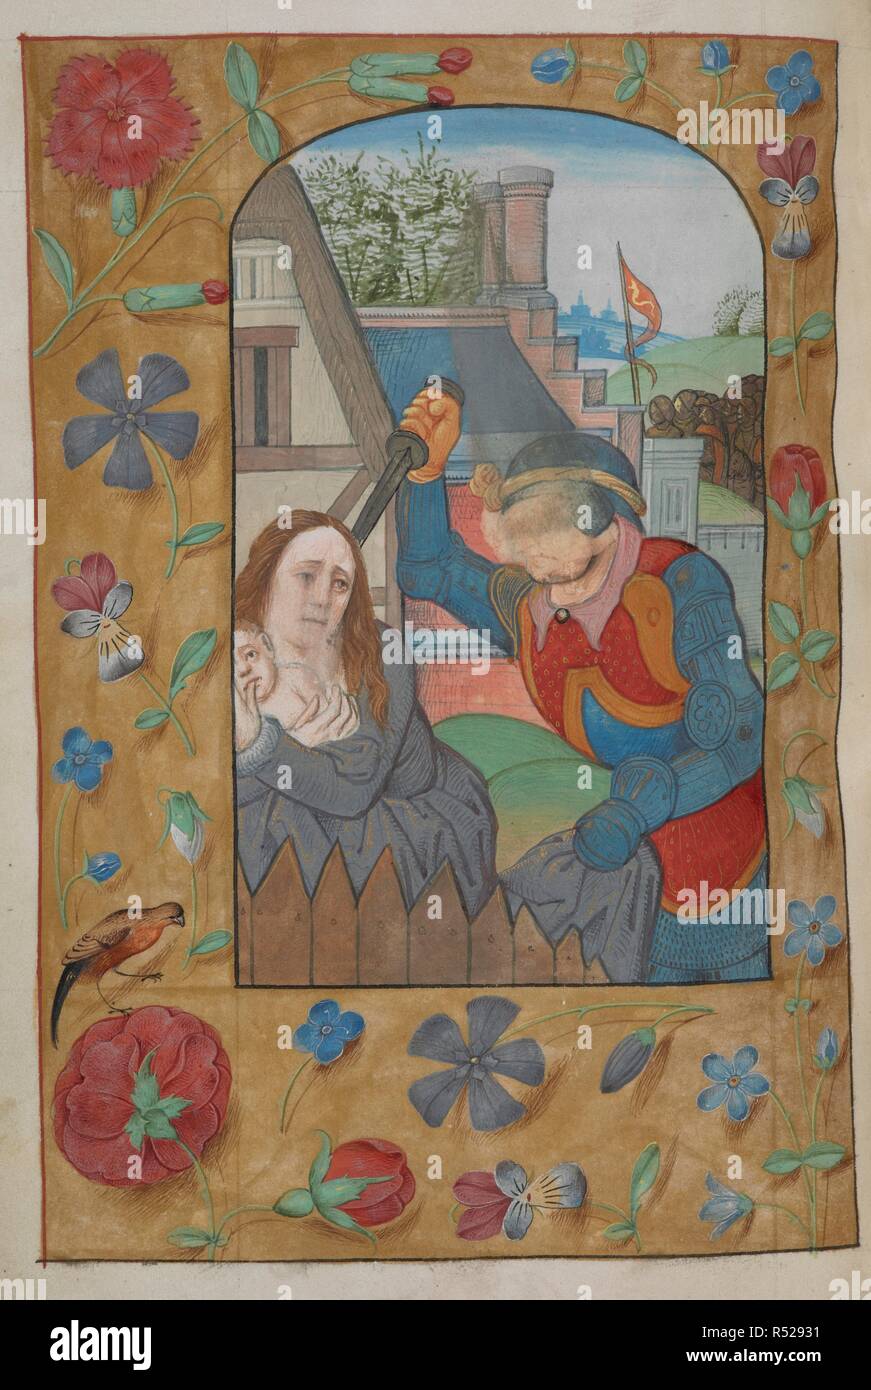 Slaughter of the Innocents, and full scatter borders. Book of Hours, Use of Sarum. Netherlands, S. (Bruges); c. 1500. Source: King's 9, f.111v. Language: Latin. Stock Photo